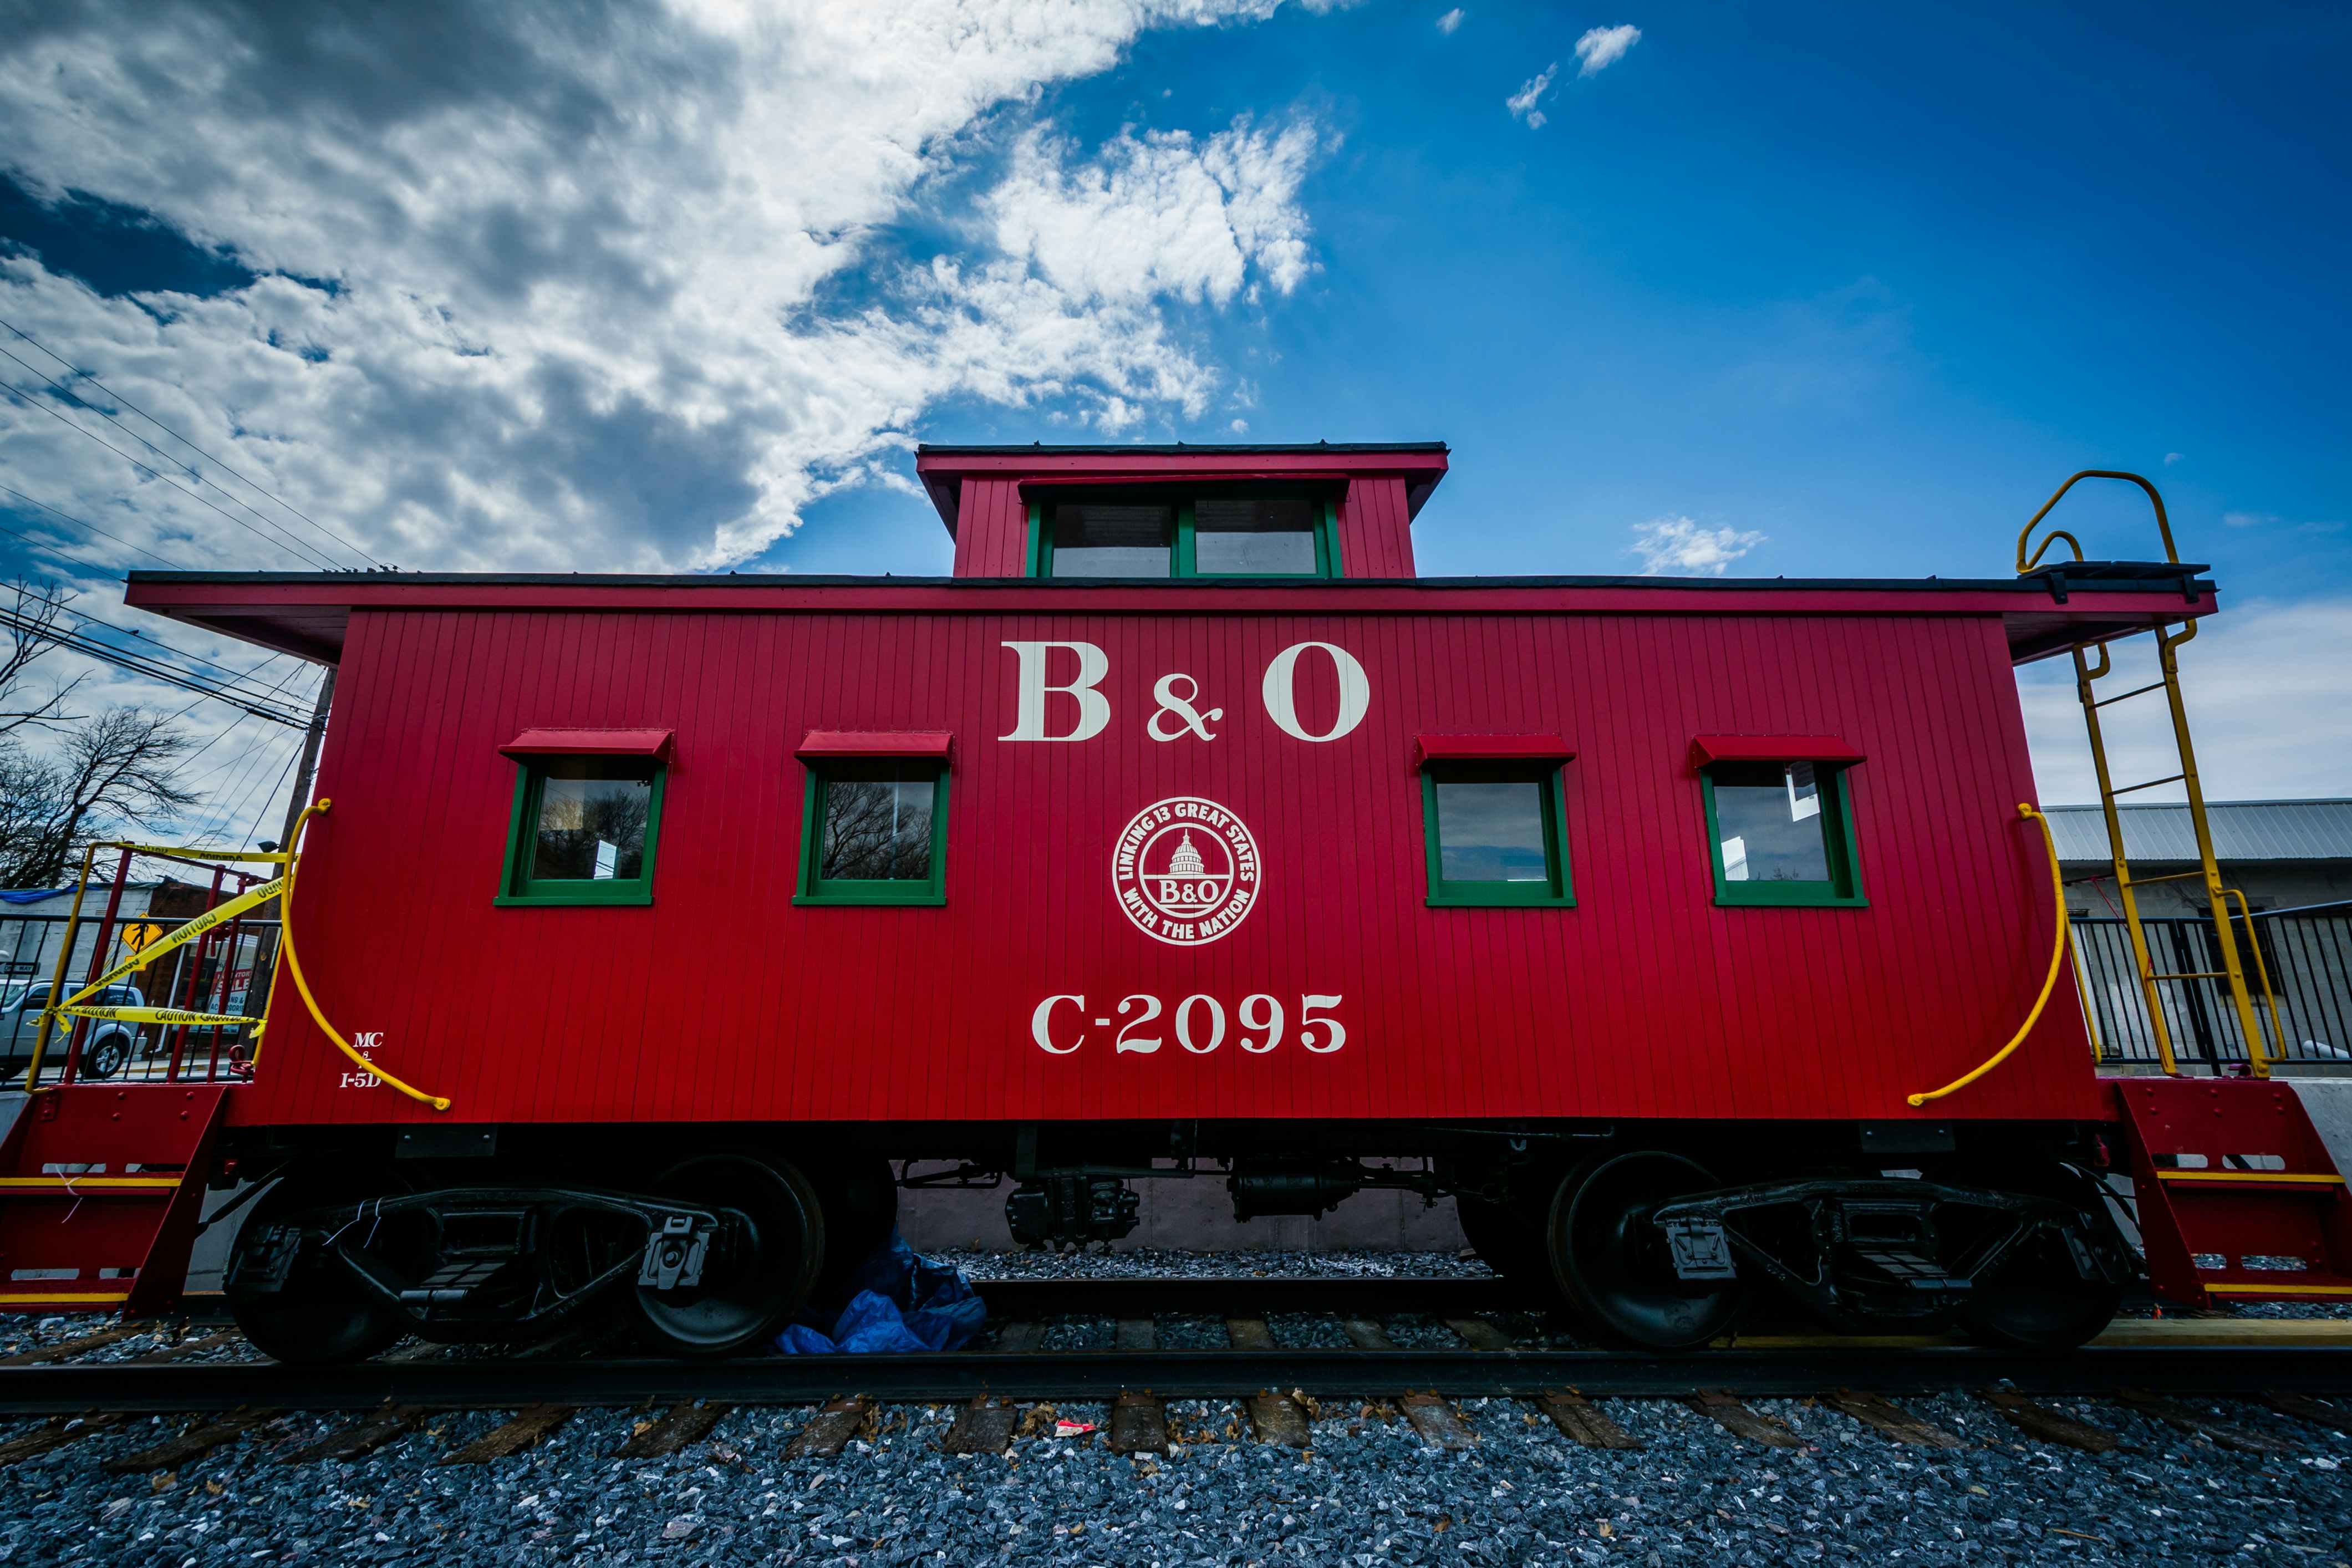 B and O Red Train Car against a clear blue sky